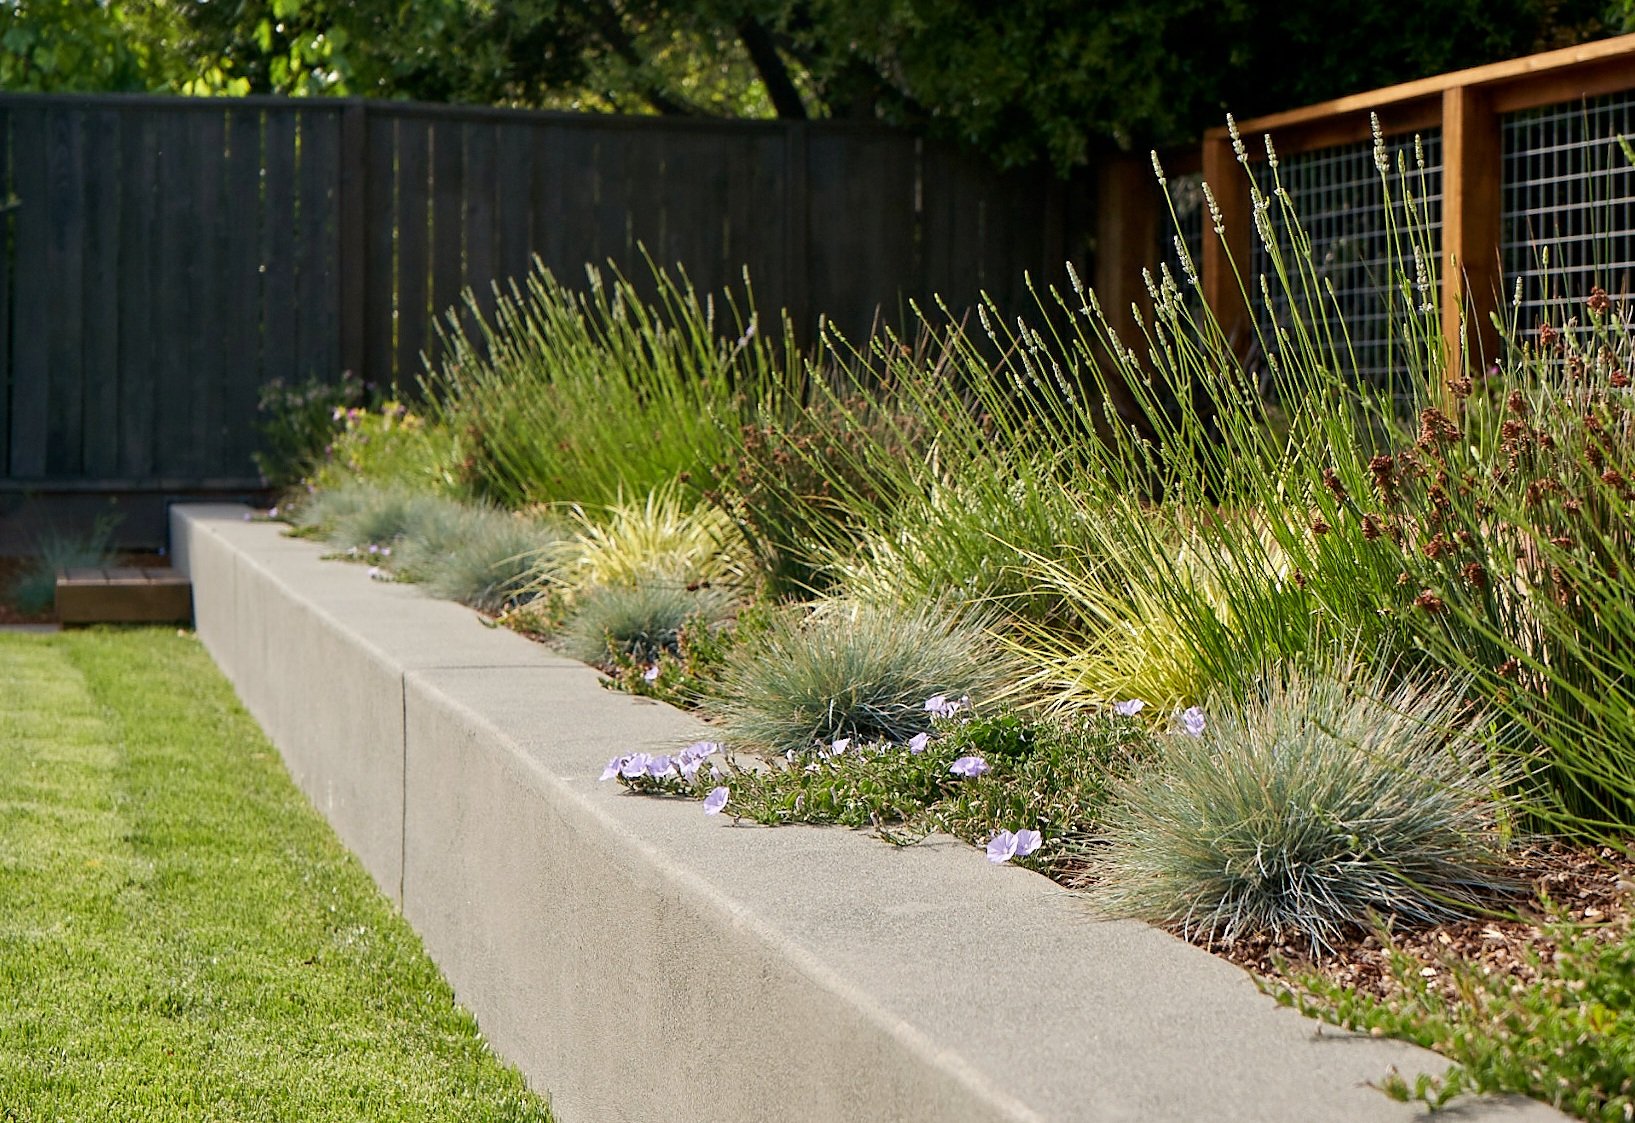 Fenced yard, lawn, short concrete retaining wall with different plants.